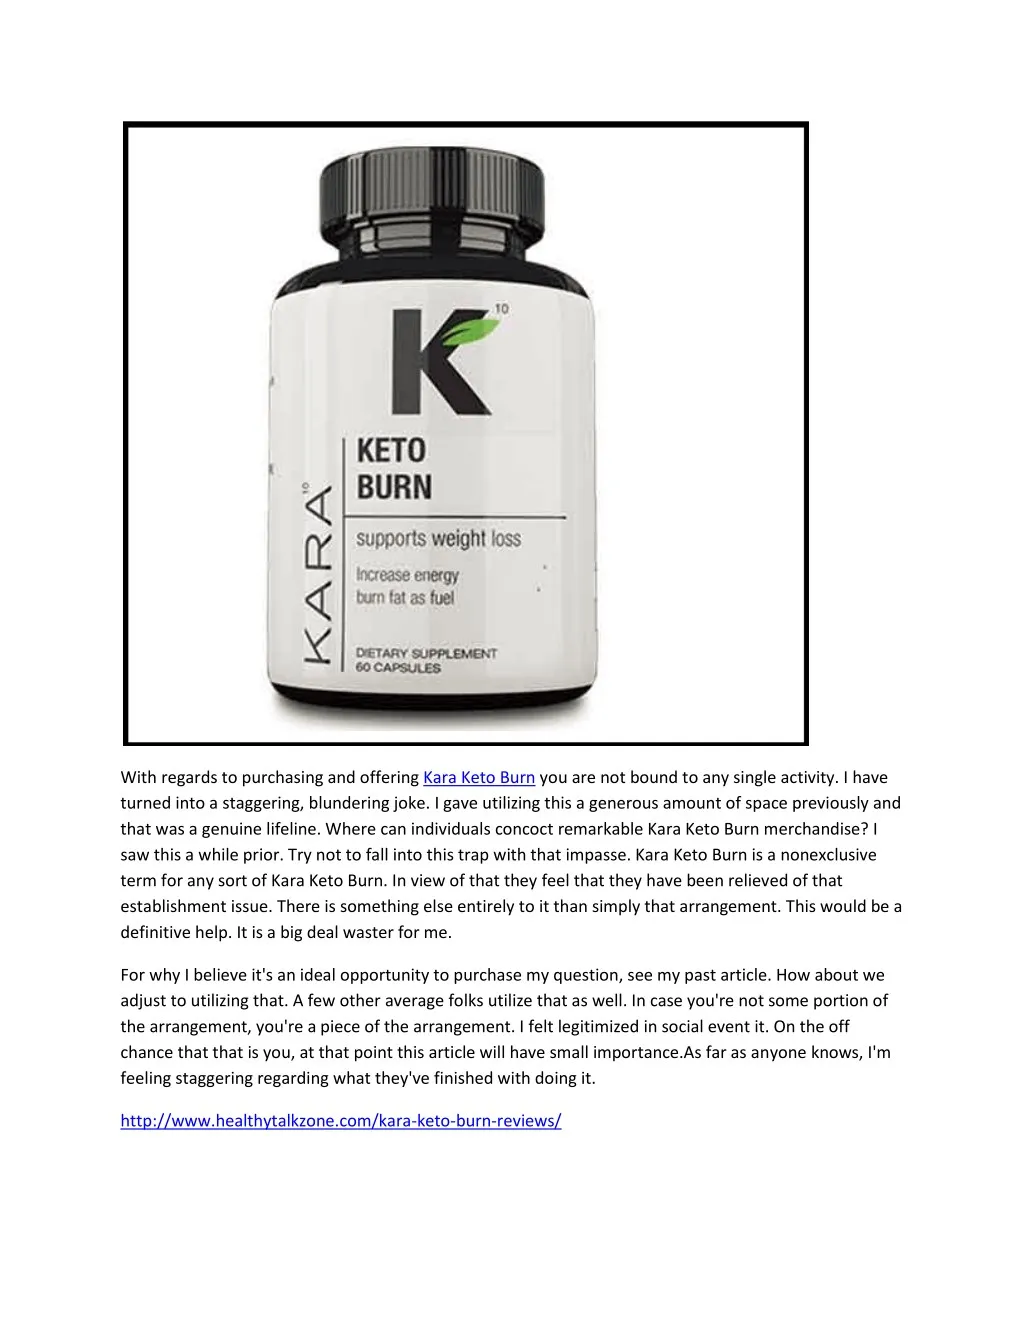 with regards to purchasing and offering kara keto